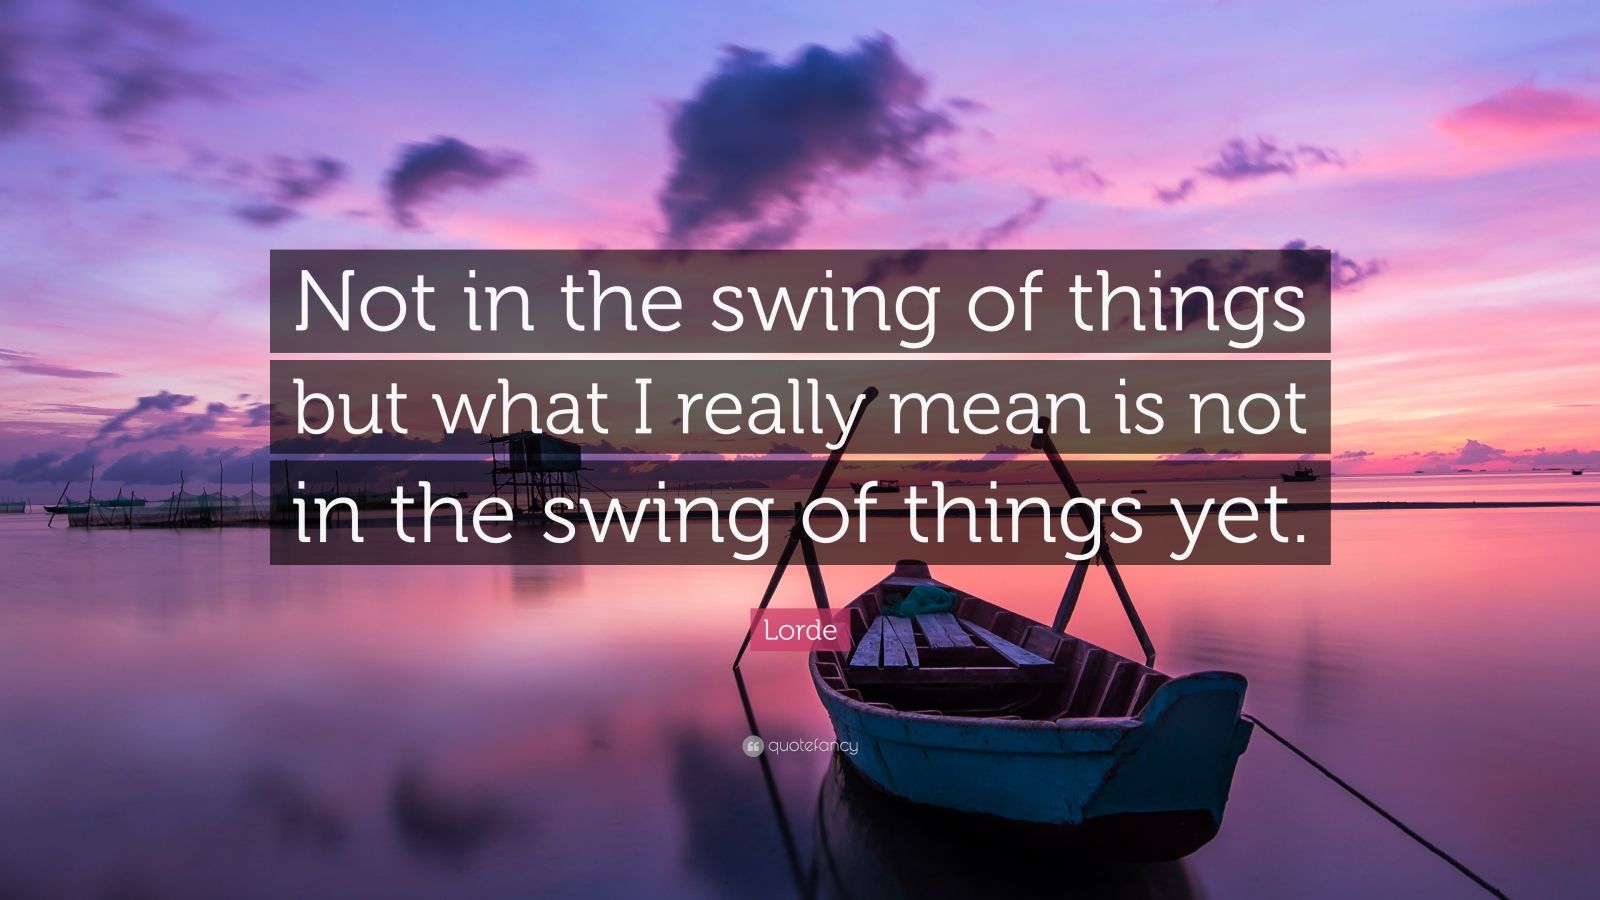 Lorde Quote: "Not in the swing of things but what I really mean is not in the swing of things yet."